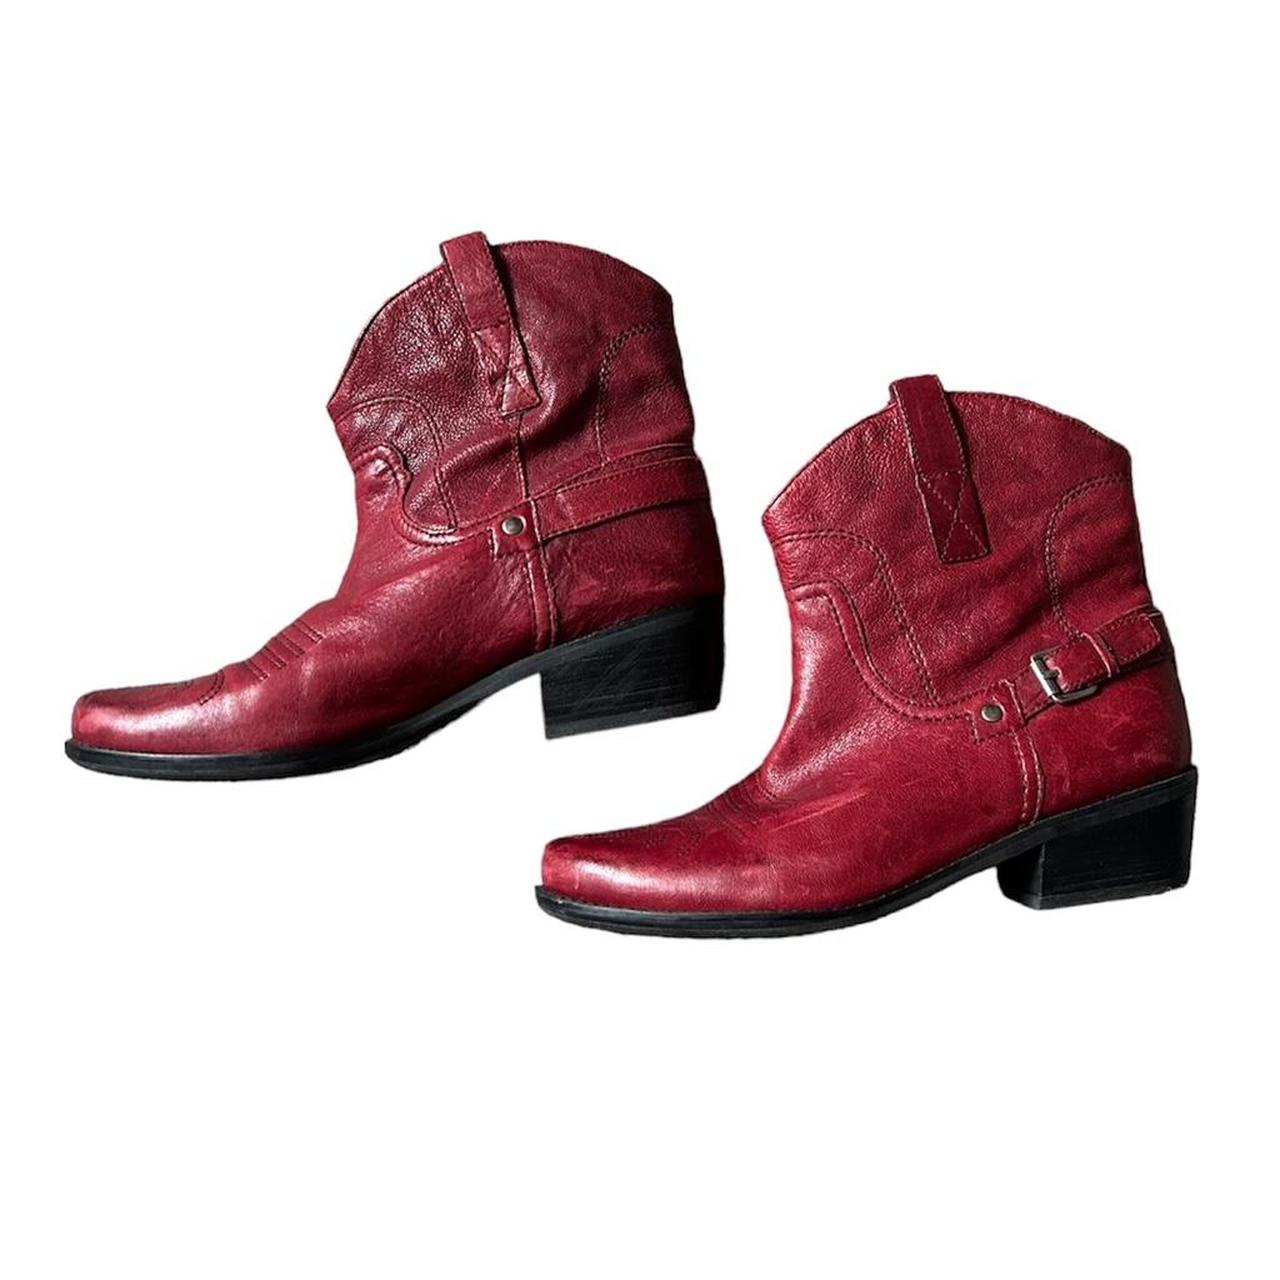 Franco Sarto Women's Red and Burgundy Boots | Depop